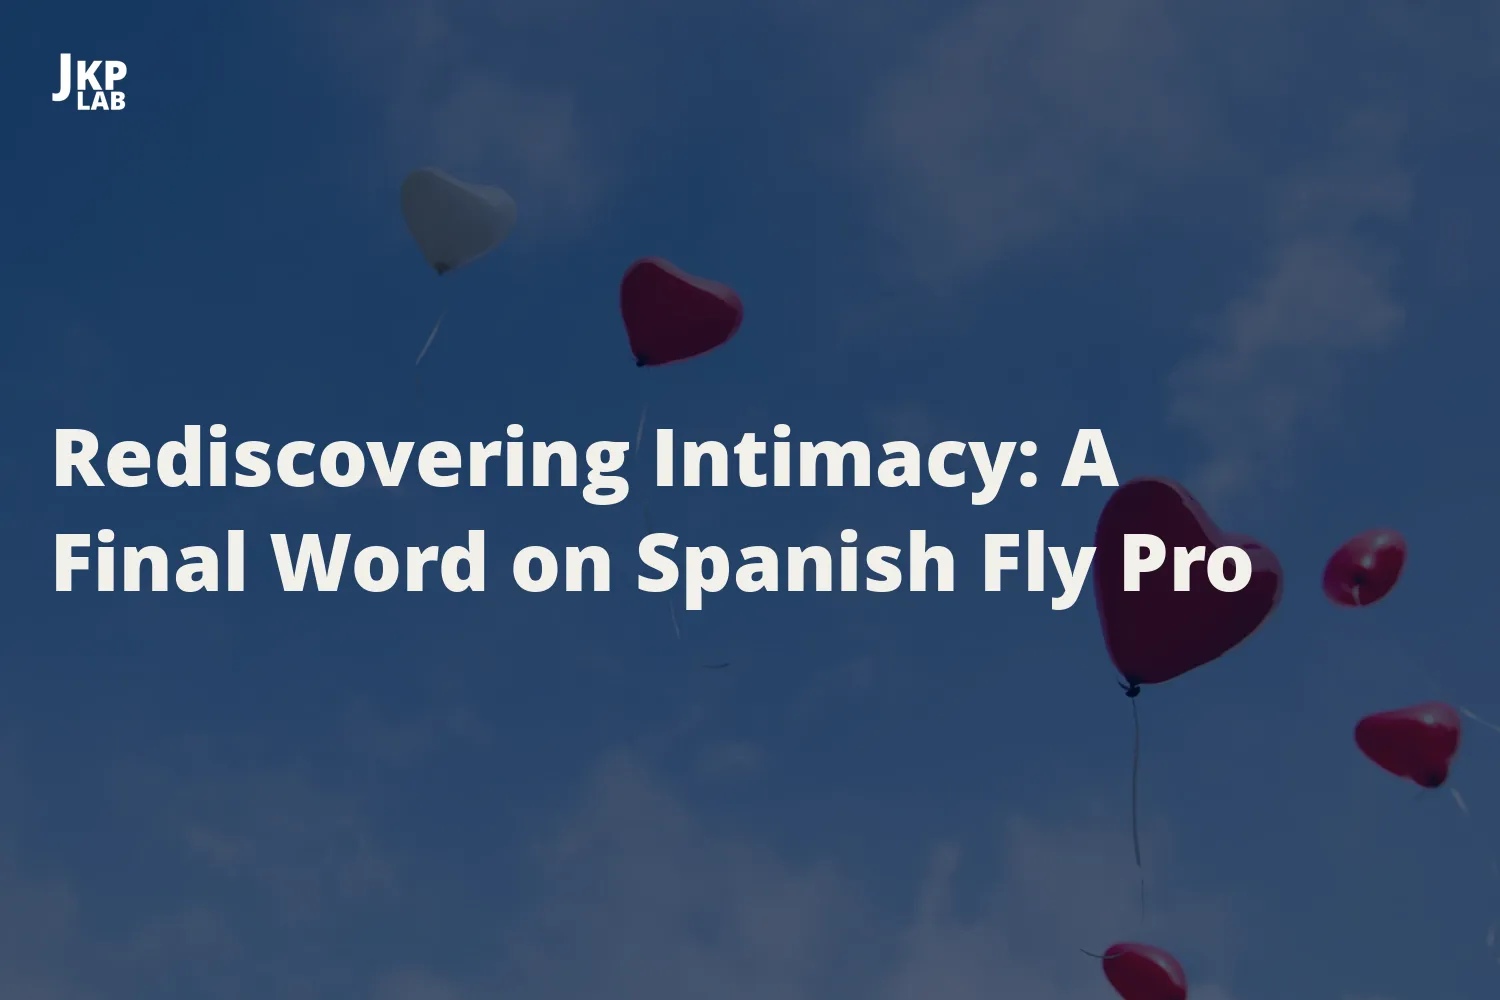 Spanish Fly as a Relationship Enhancer